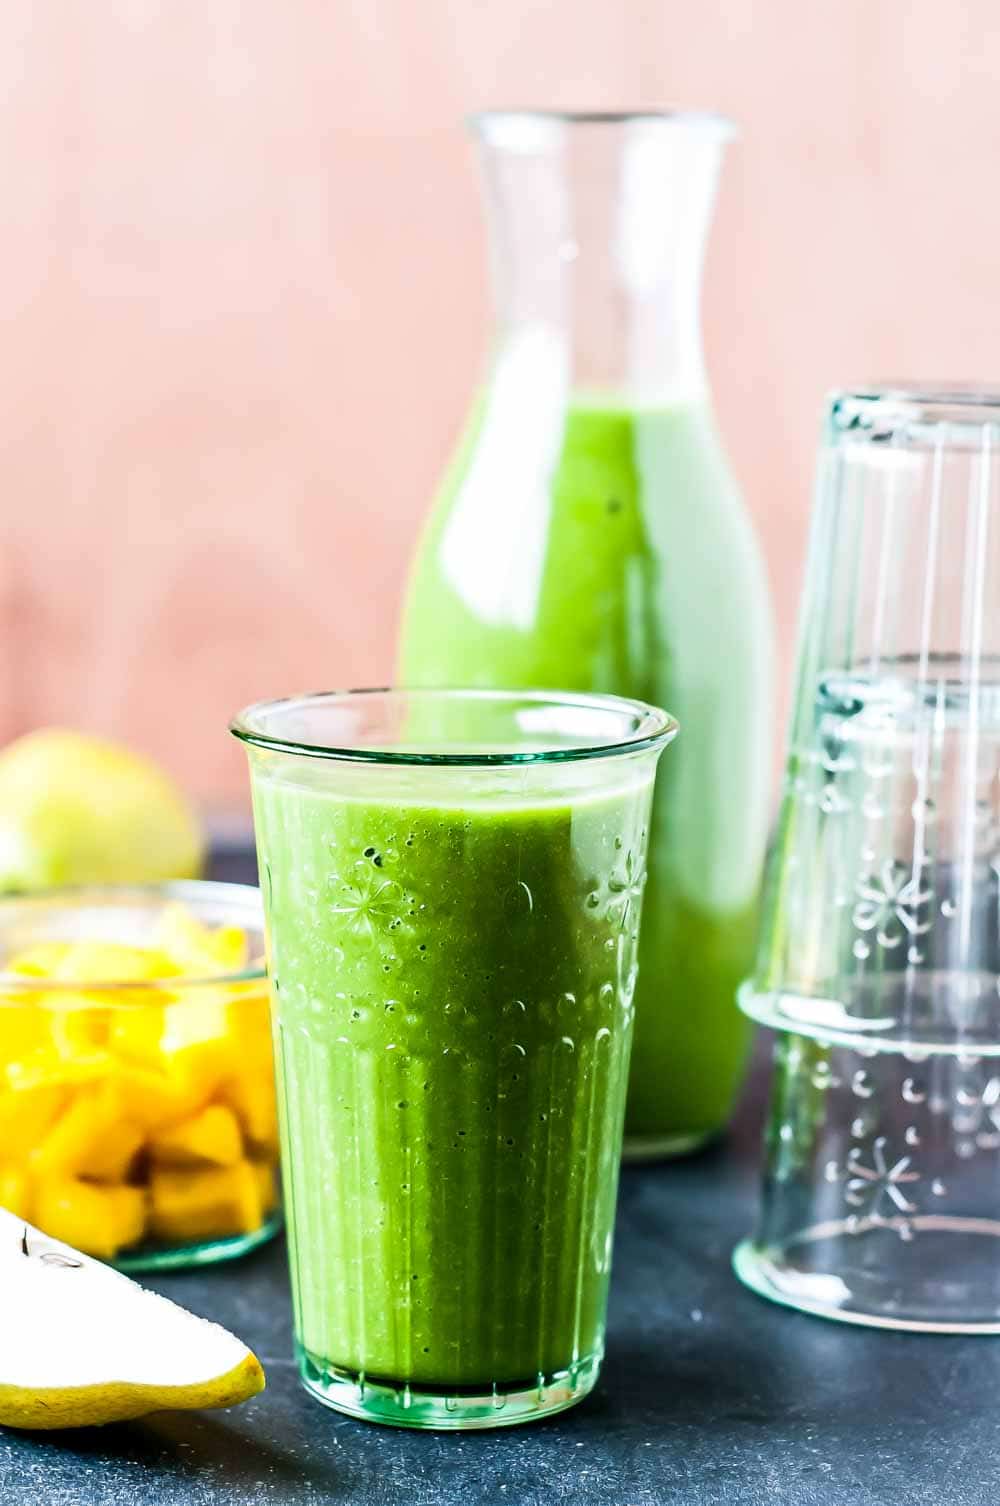 bright green smoothie in a decorative glass.